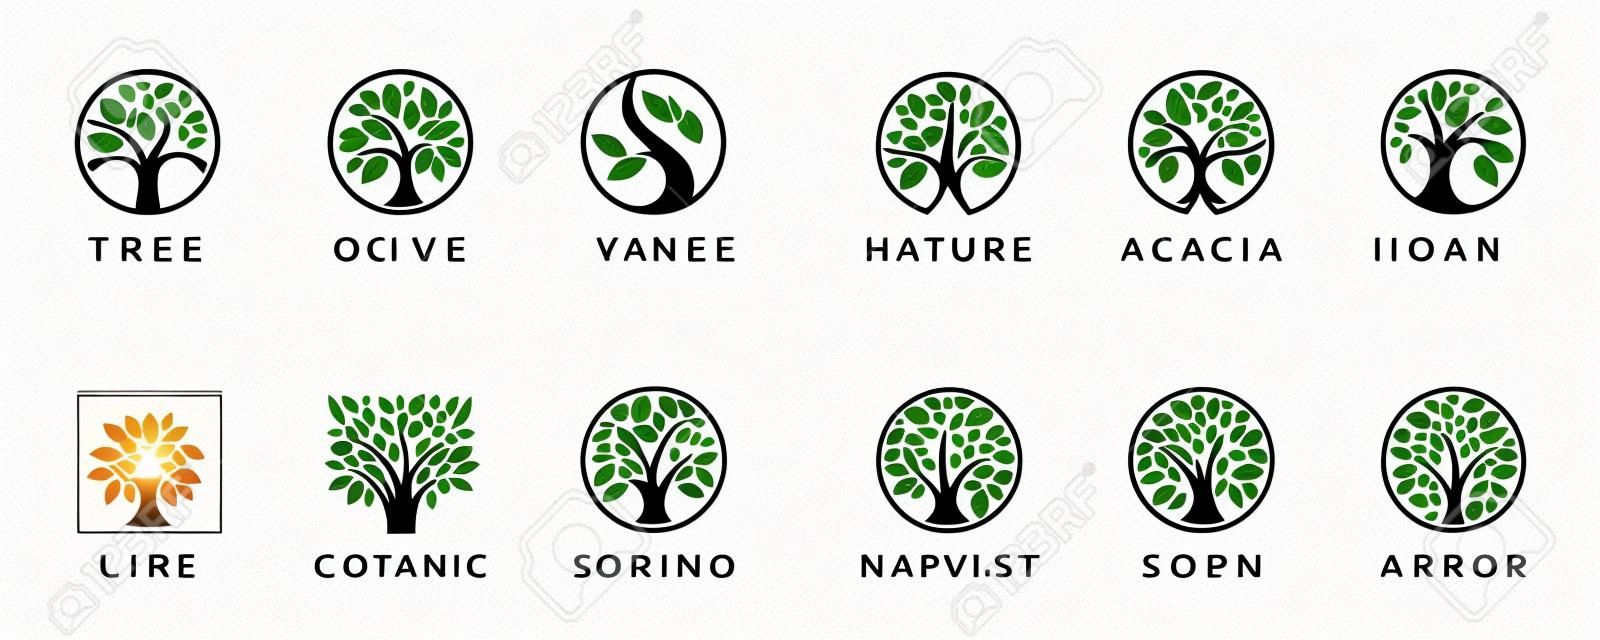 Abstract Tree of life logo icons set. Botanic plant nature symbols. Tree branch with leaves signs. Natural design elements emblem collection. Vector illustration.